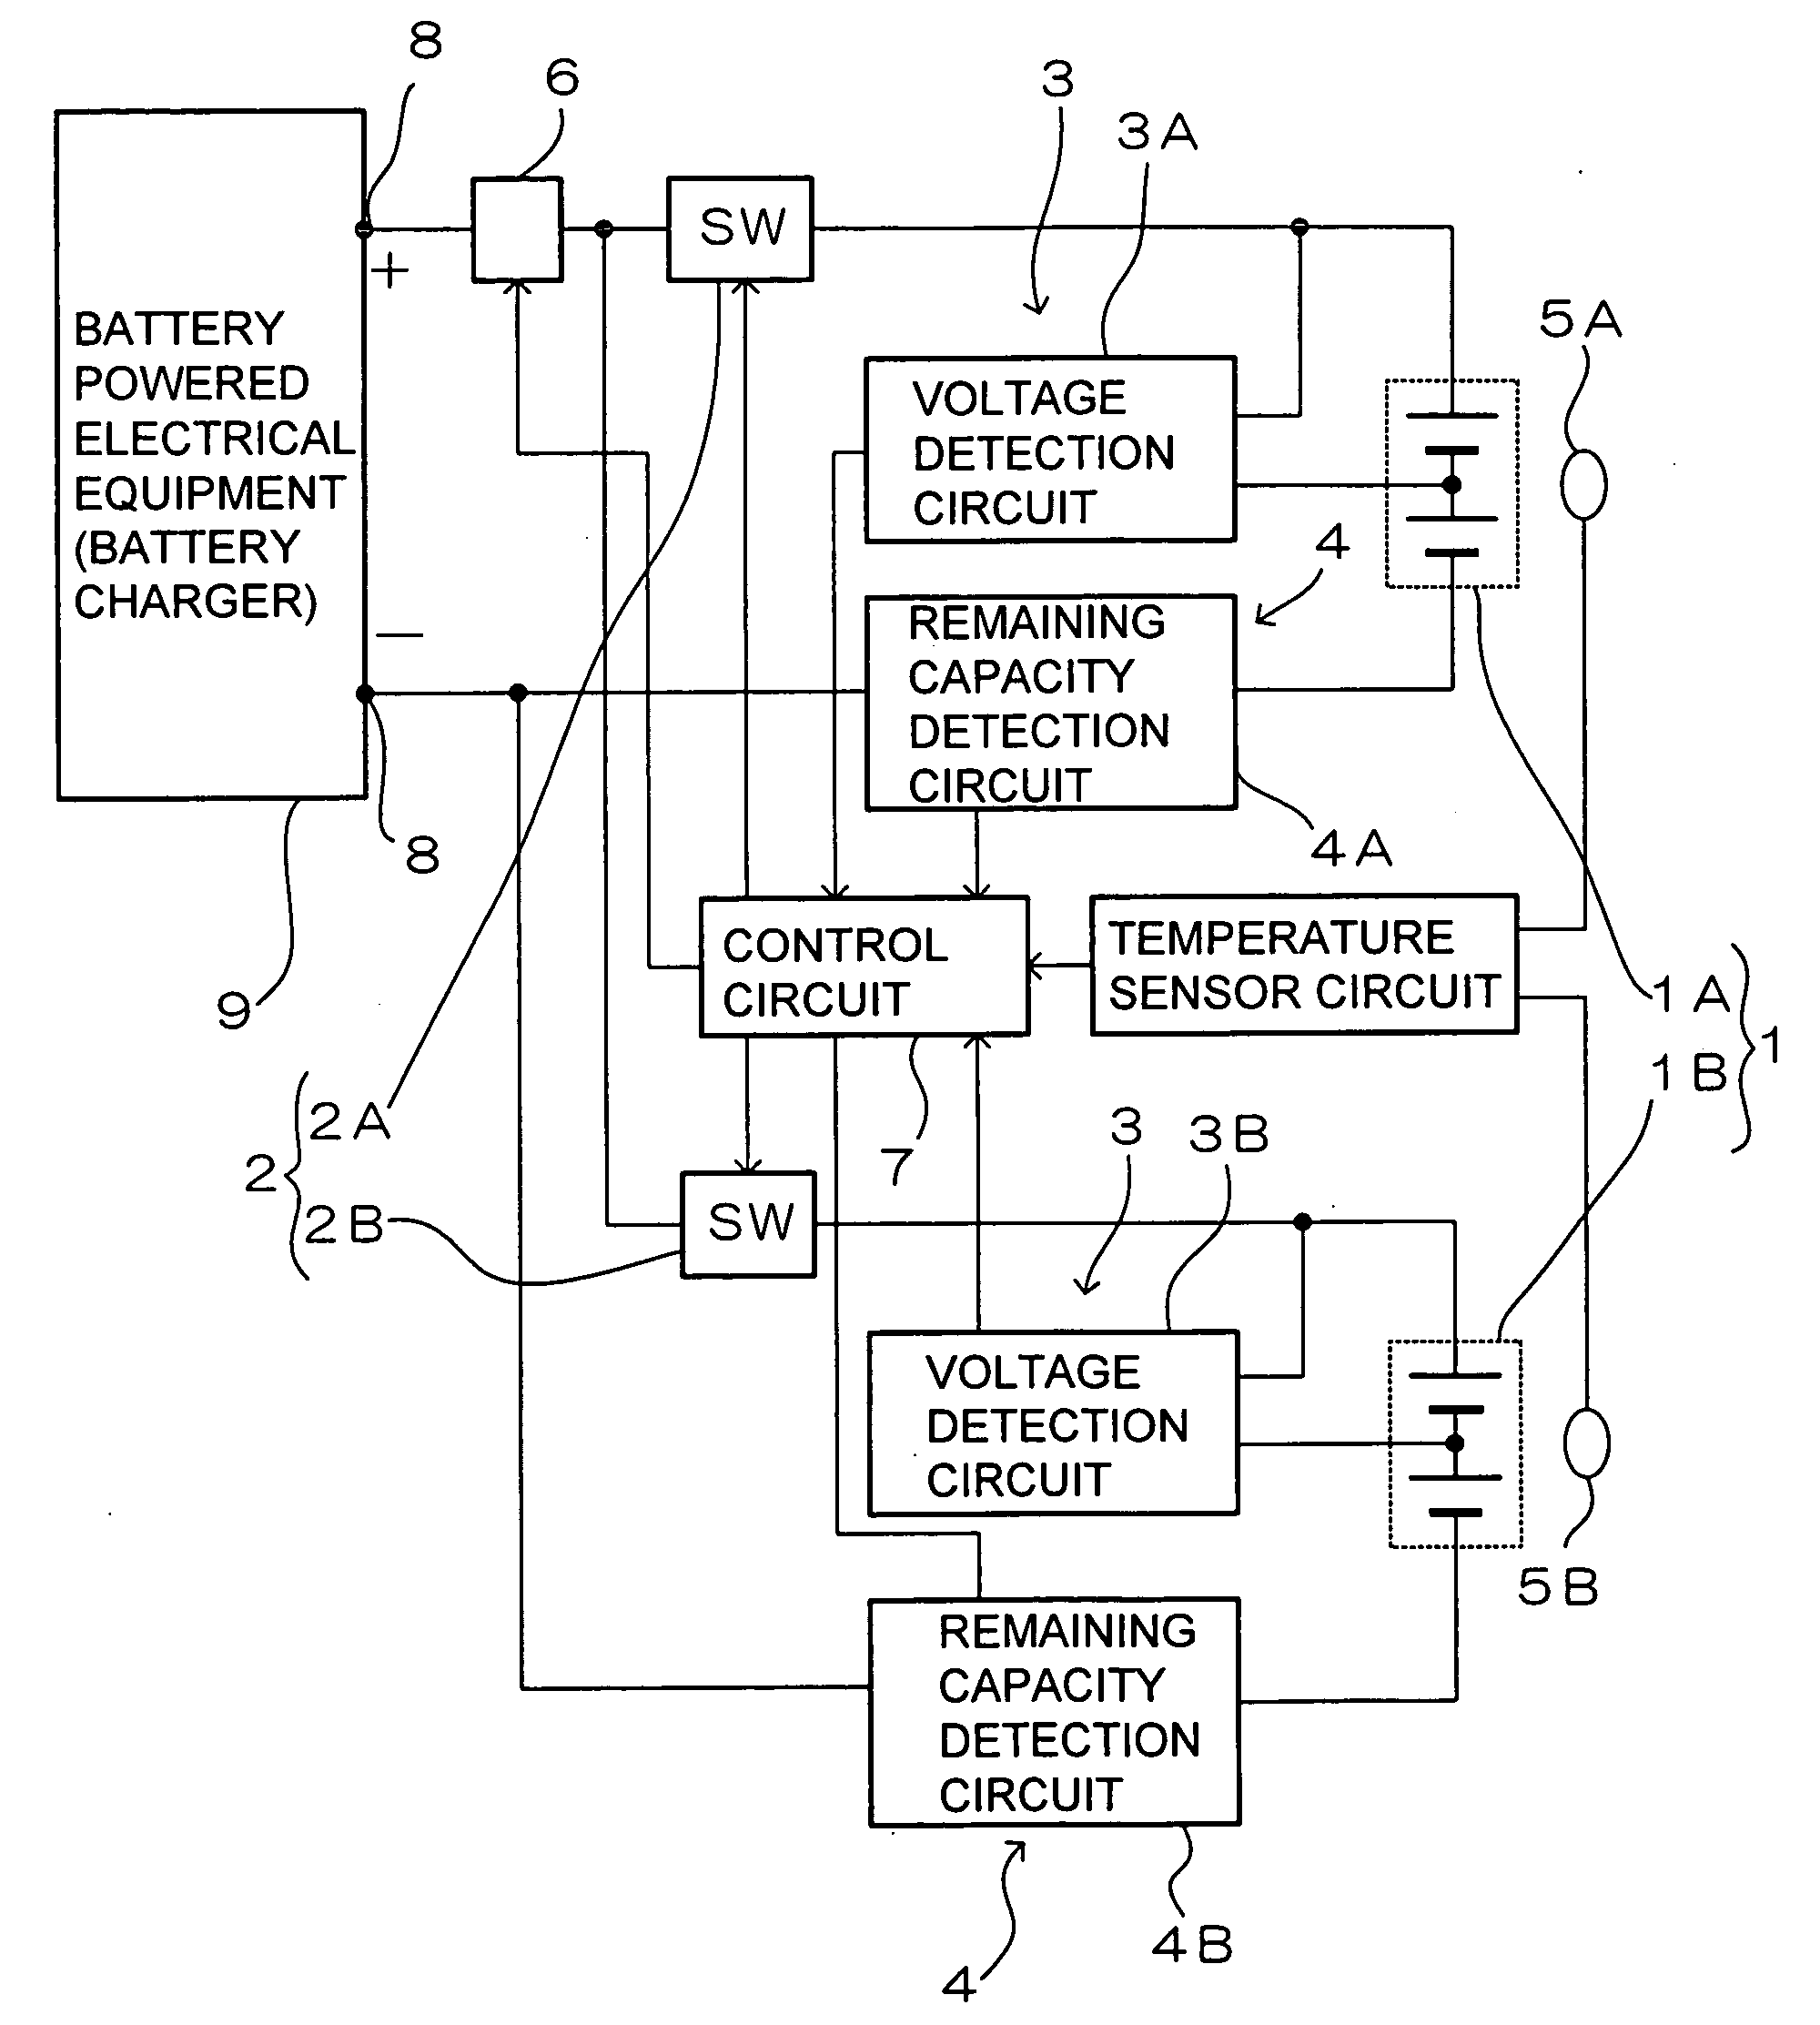 Method of charging and discharging a plurality of batteries